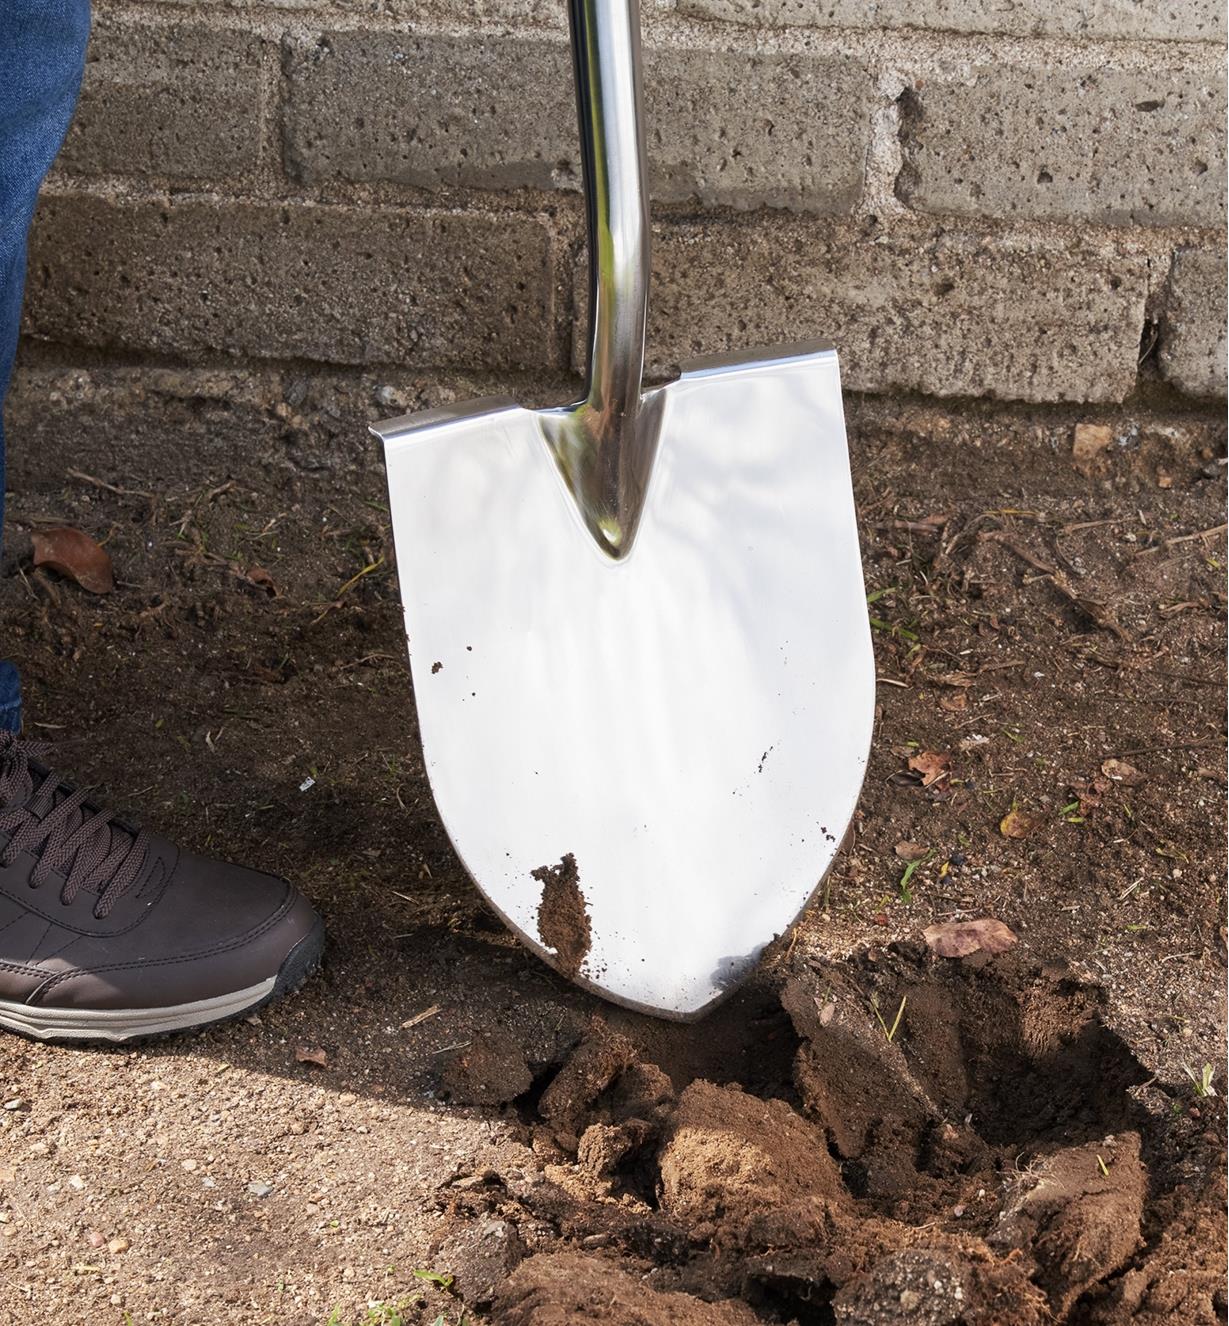 The head on the stainless-steel shovel next to a hole in the ground